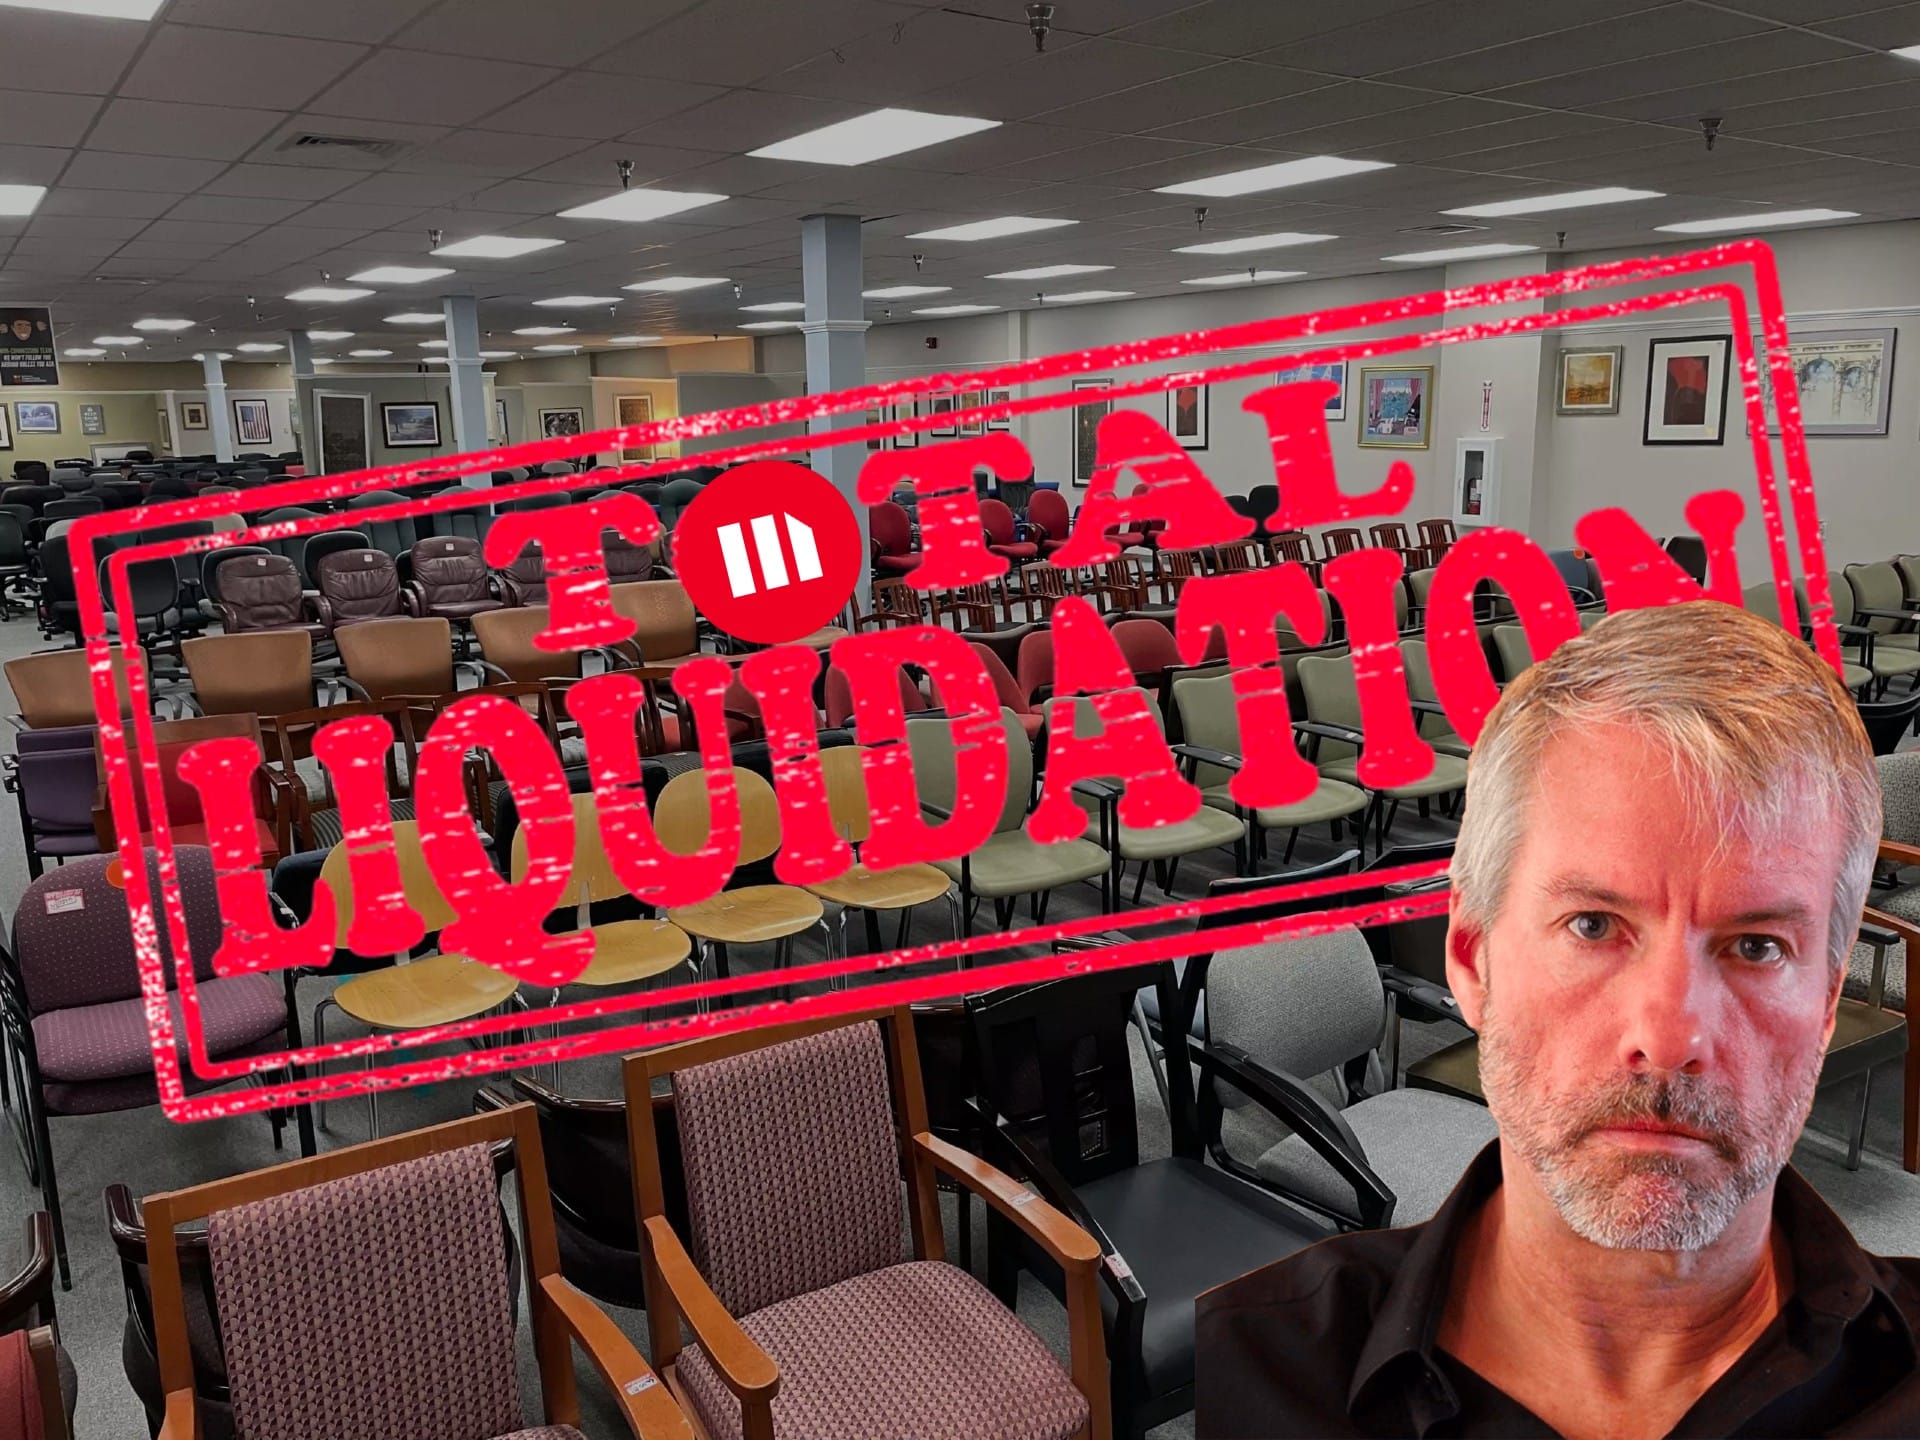 Standing Desks Mandatory: MicroStrategy Announces Liquidation of All Company Chairs to Buy Bitcoin